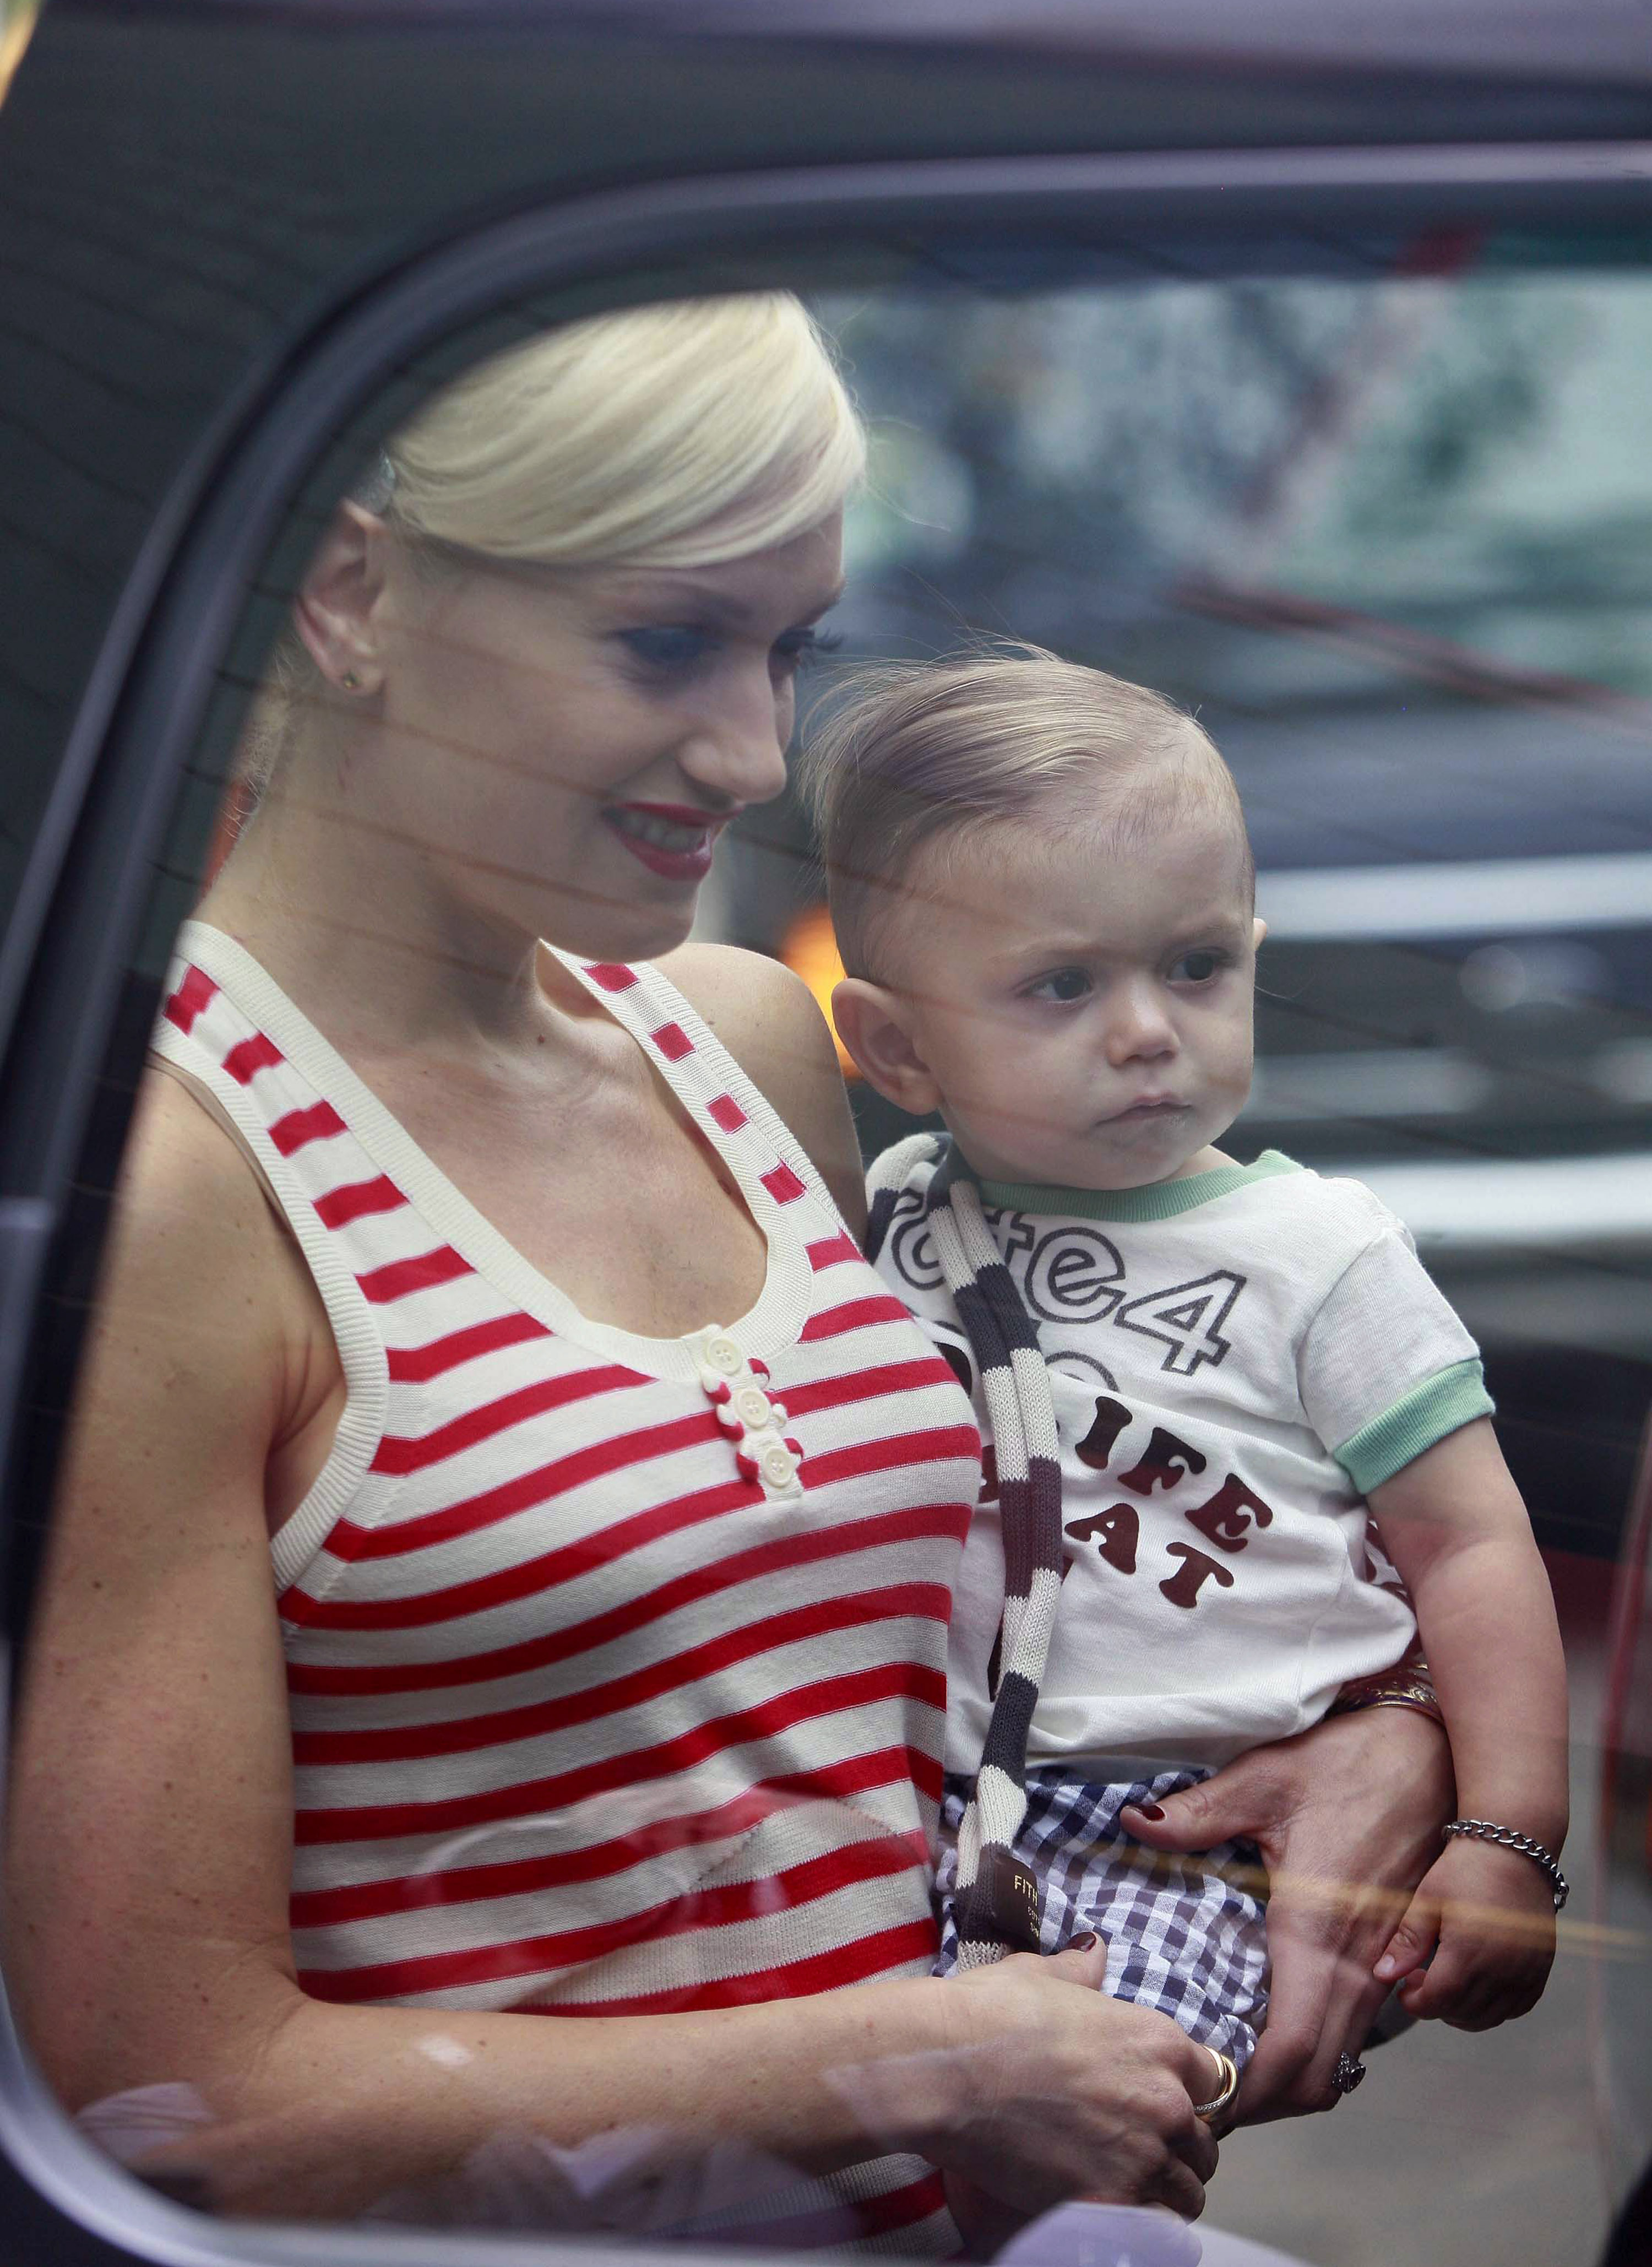 Gwen Stefani with her son, Kingston Rossdale during his first birthday celebration on May 26, 2007 in New York City | Source: Getty Images